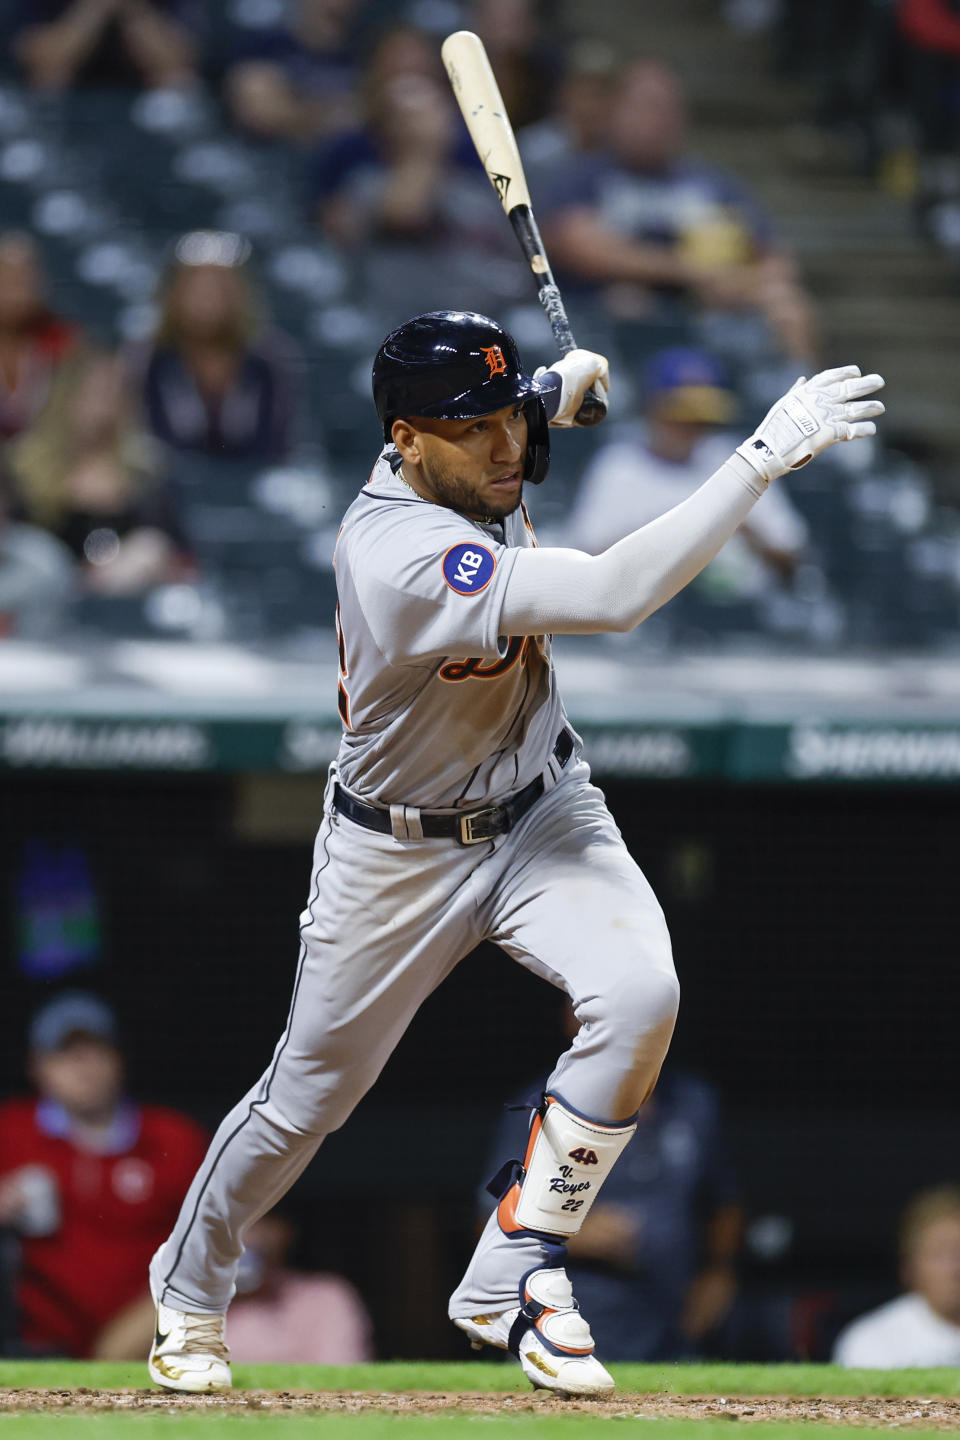 Detroit Tigers' Victor Reyes watches his RBI single off Cleveland Guardians relief pitcher Sam Hentges during the eighth inning in the second baseball game of a doubleheader Monday, Aug. 15, 2022, in Cleveland. (AP Photo/Ron Schwane)